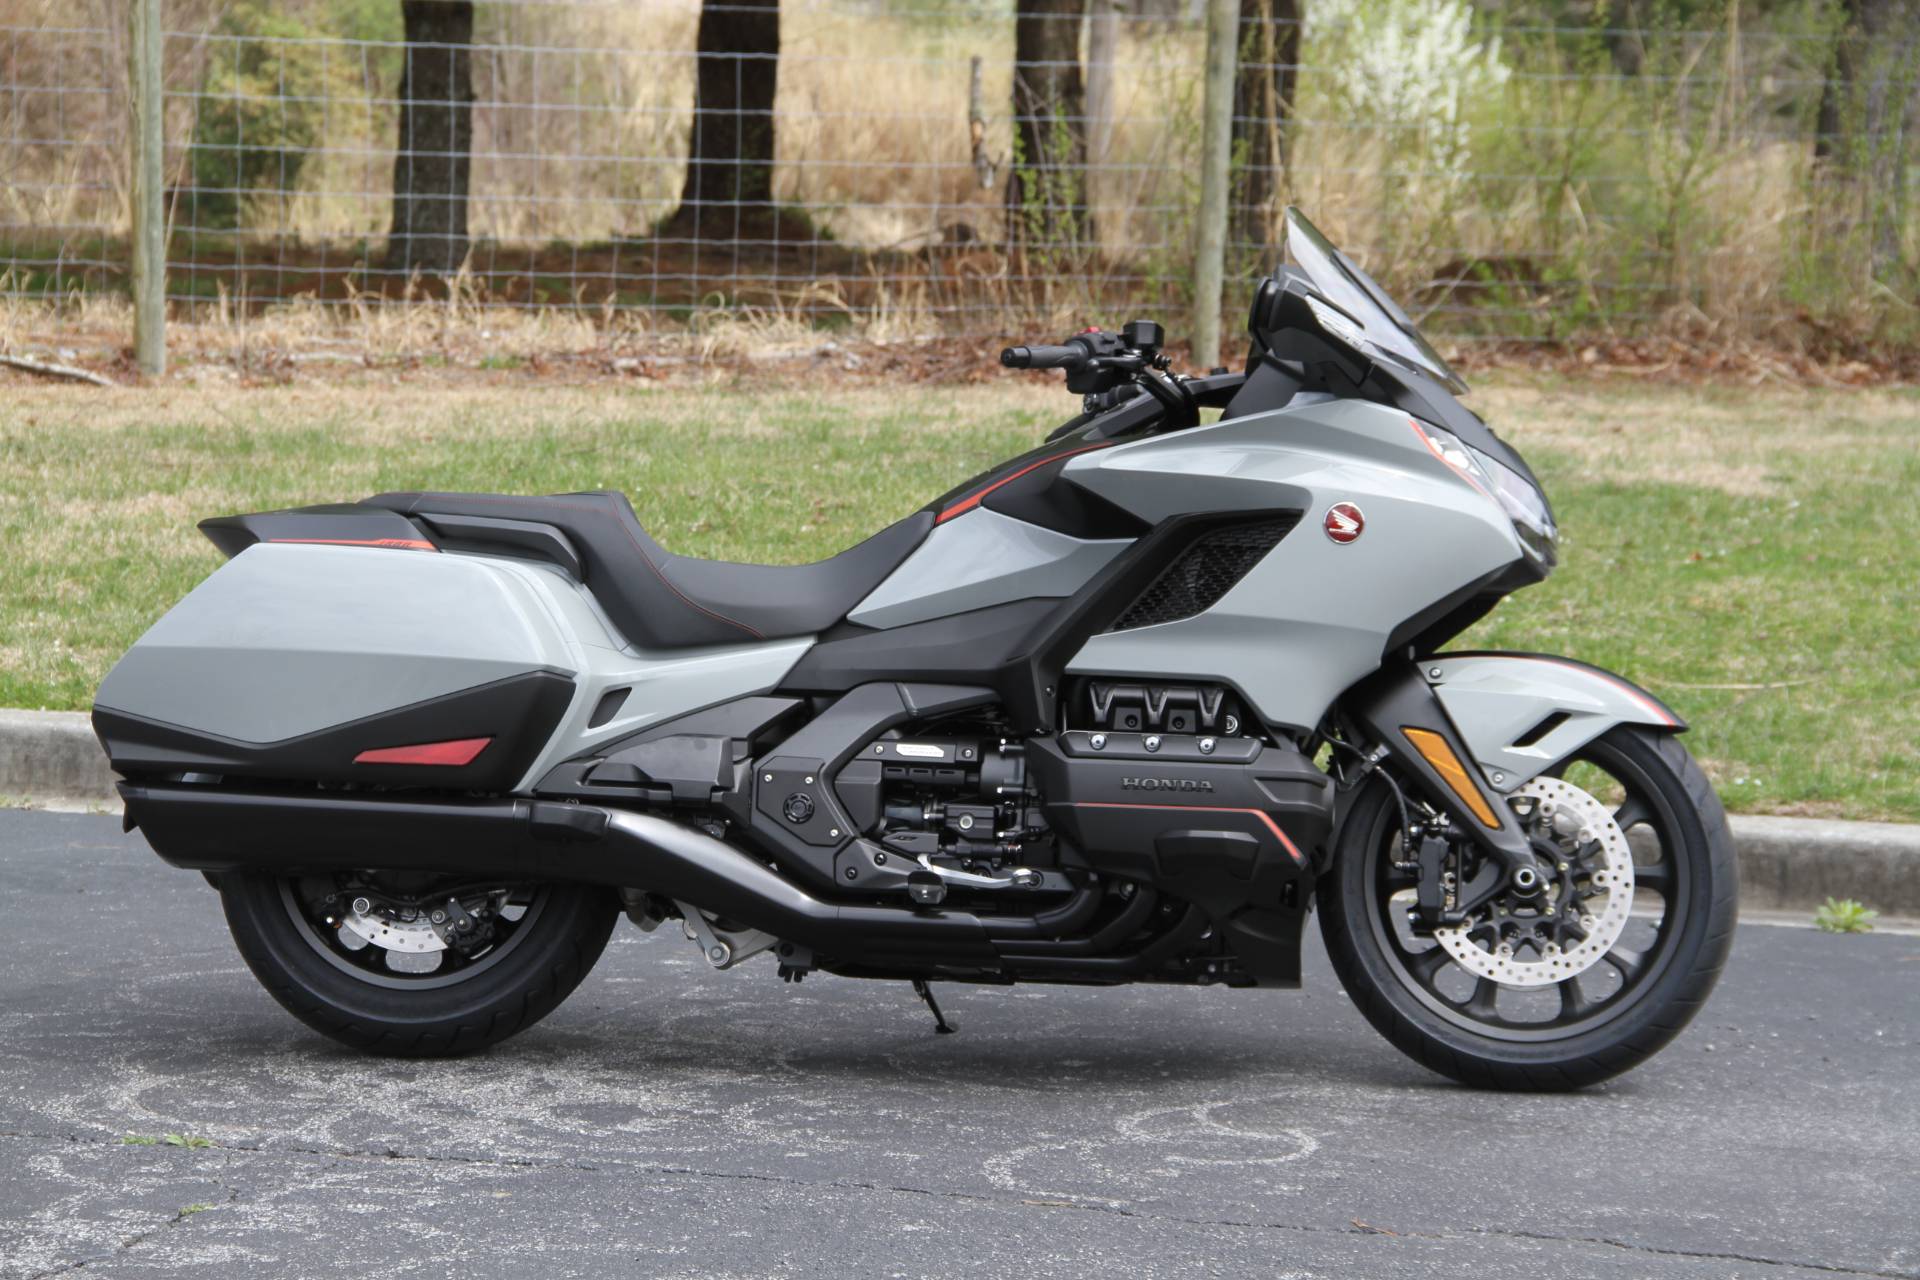 New 2021 Honda Gold Wing Motorcycles In Hendersonville Nc Stock Number 253704